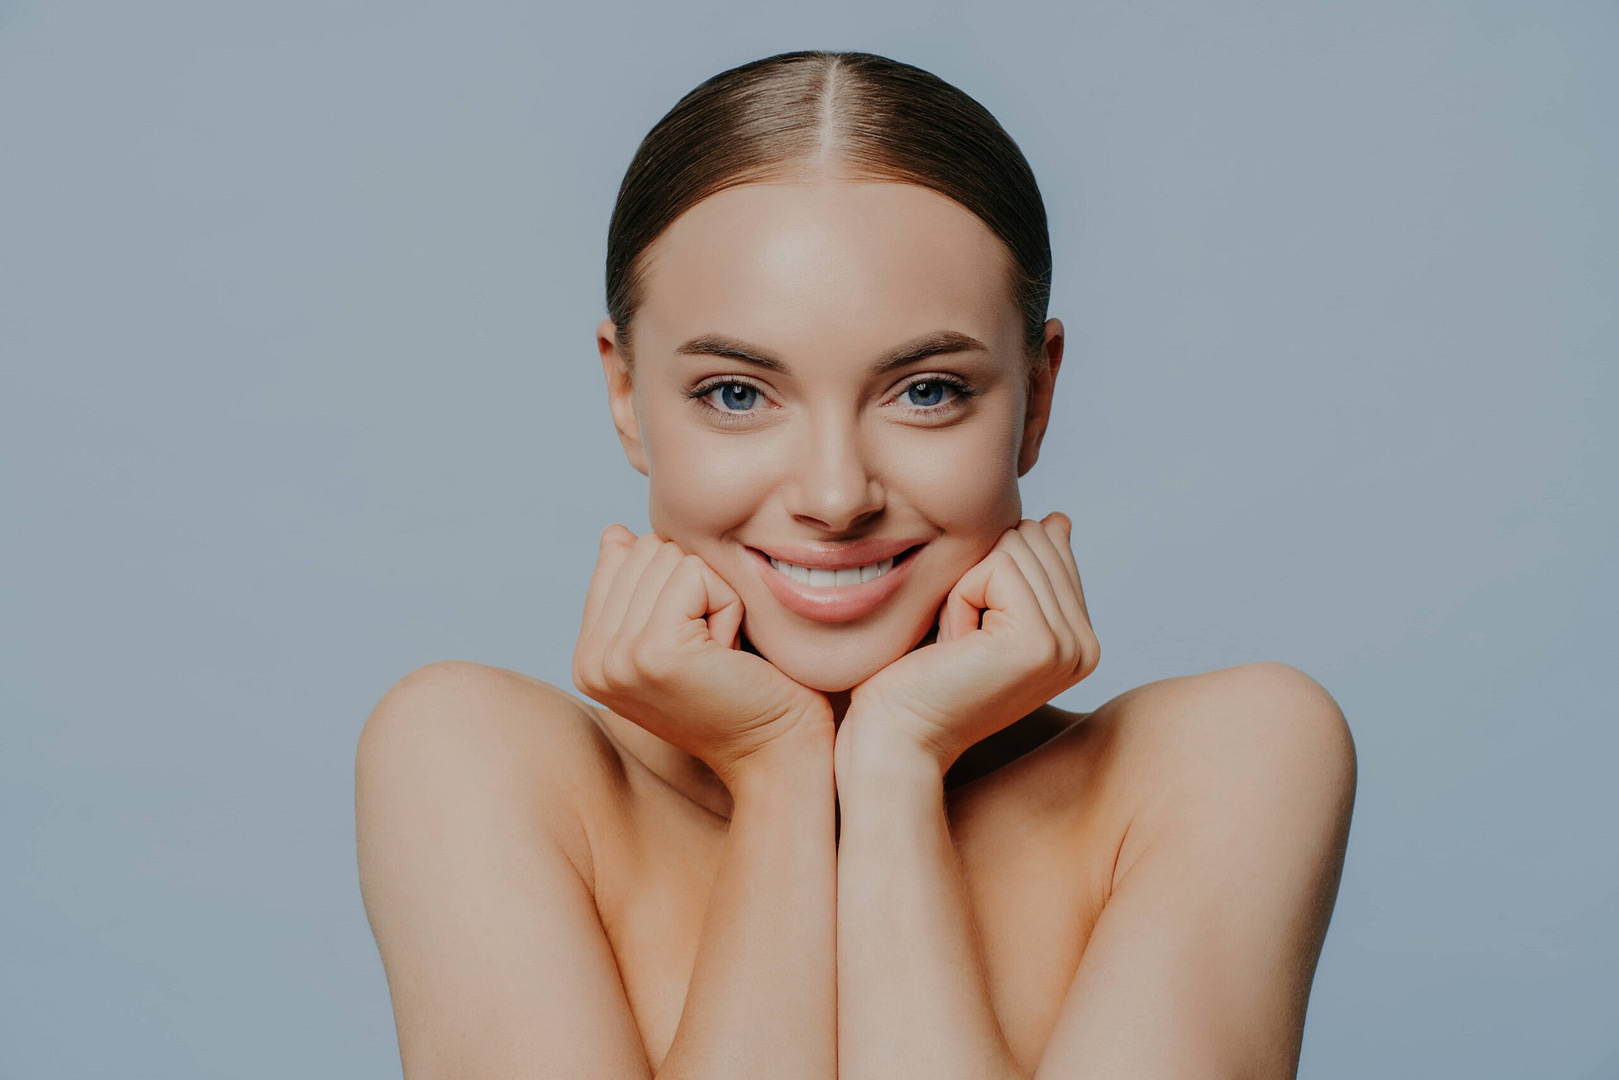 Women, Skin Care And Tenderness Concept. Young Female Takes Care Of Skin And Body Health, Keeps Hands Under Chin And Smiles Gently, Wears Makeup, Has Combed Hair, Delighted With Skin Care Product